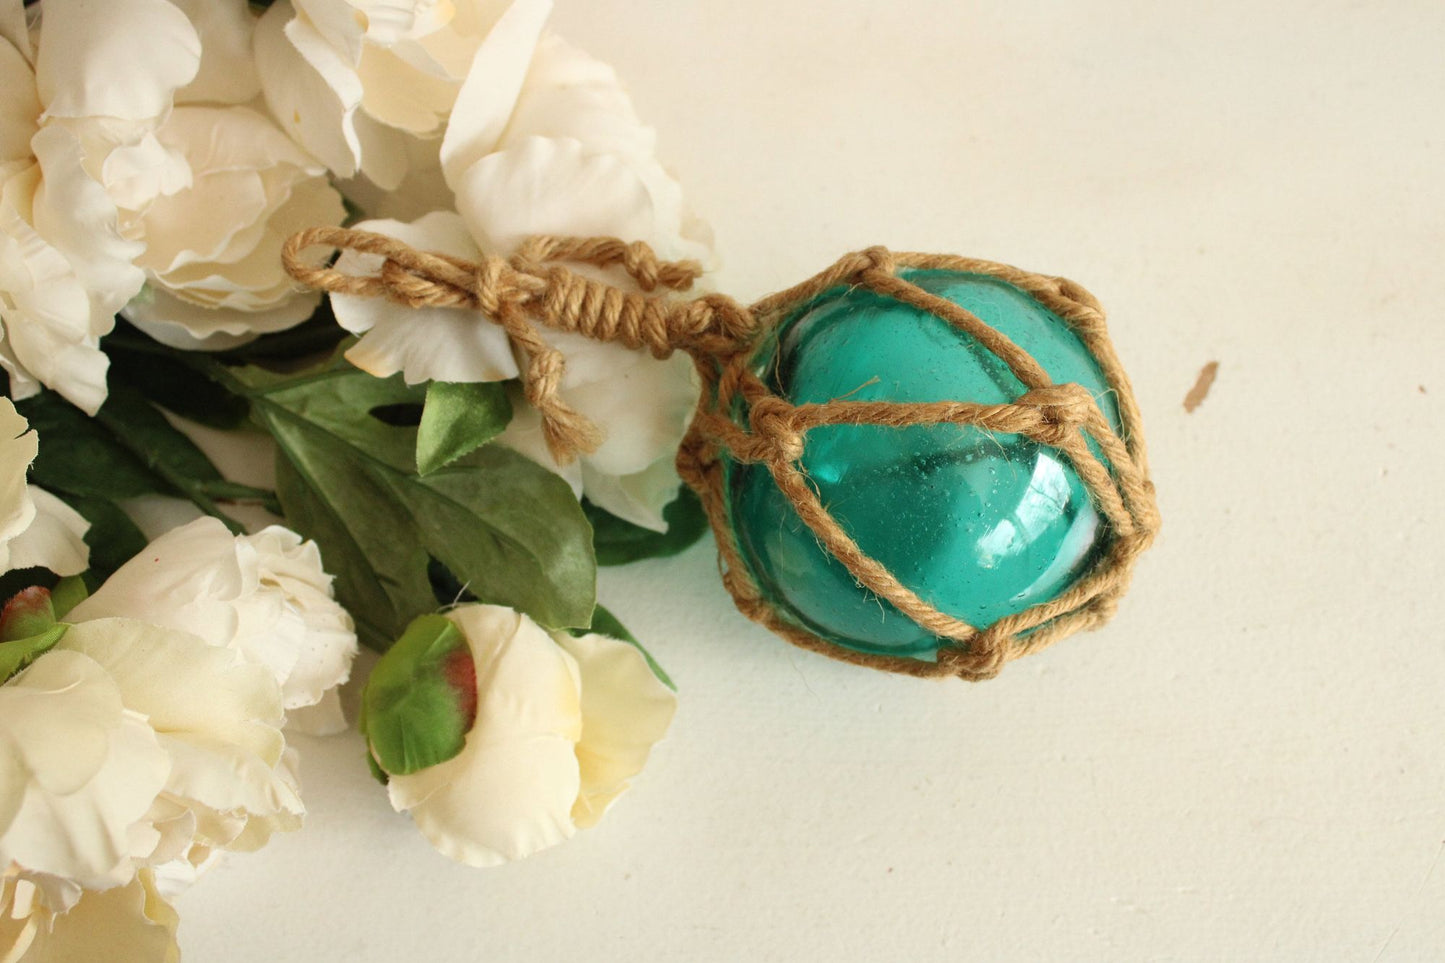 Vintage 1990s 2000s Glass Fishing Float, 4" Aqua Turquoise Wrapped in Twine